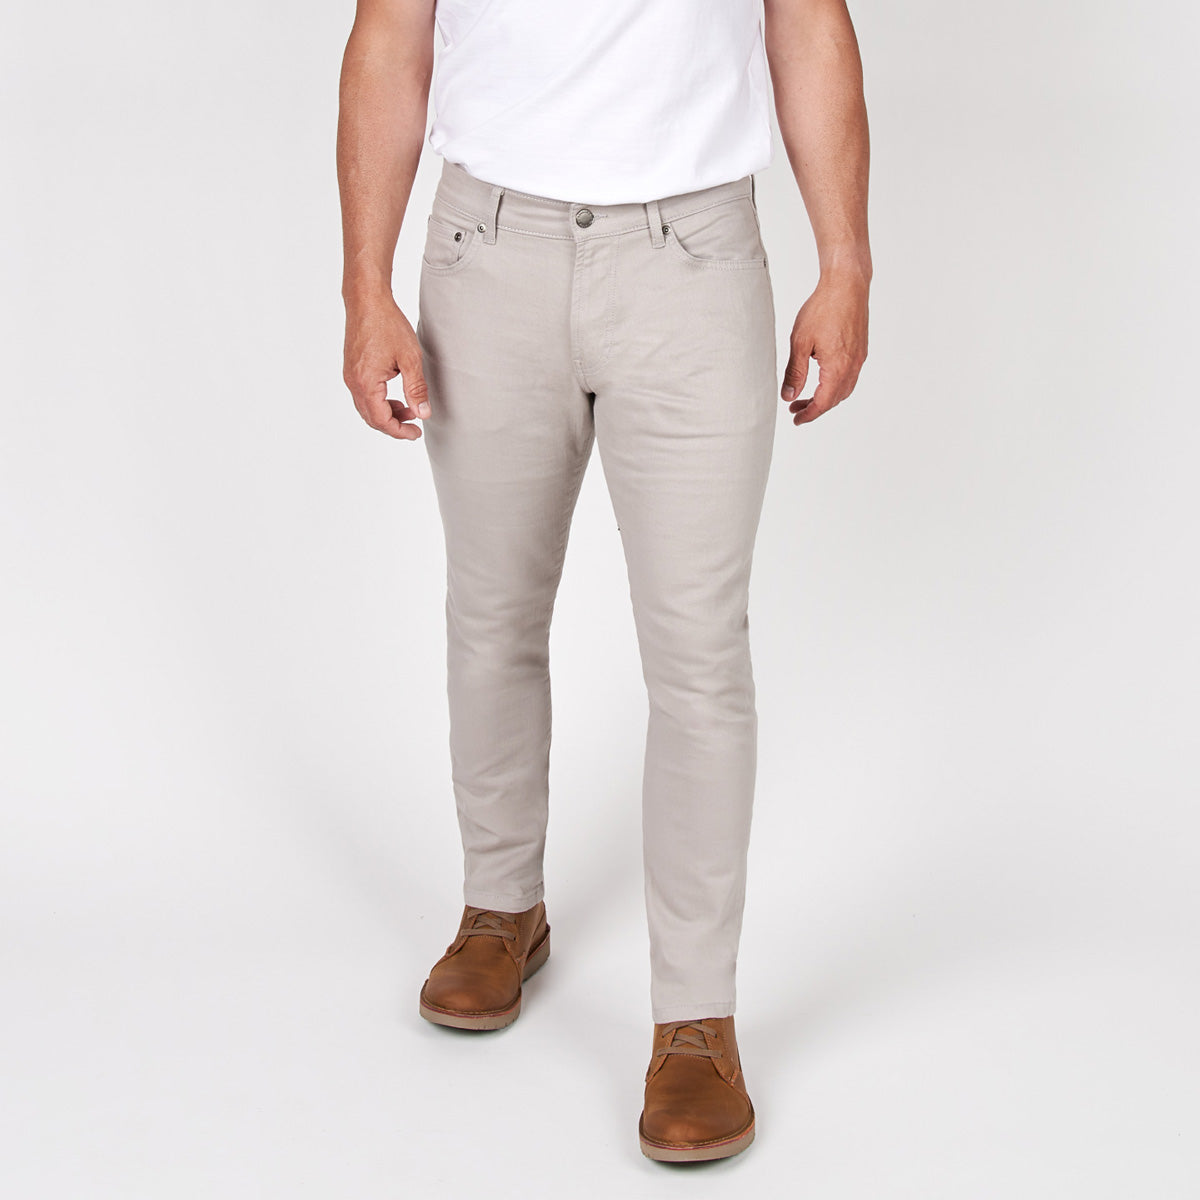 Jeans vs Chinos: Which Type of Pants Is Right For Me?